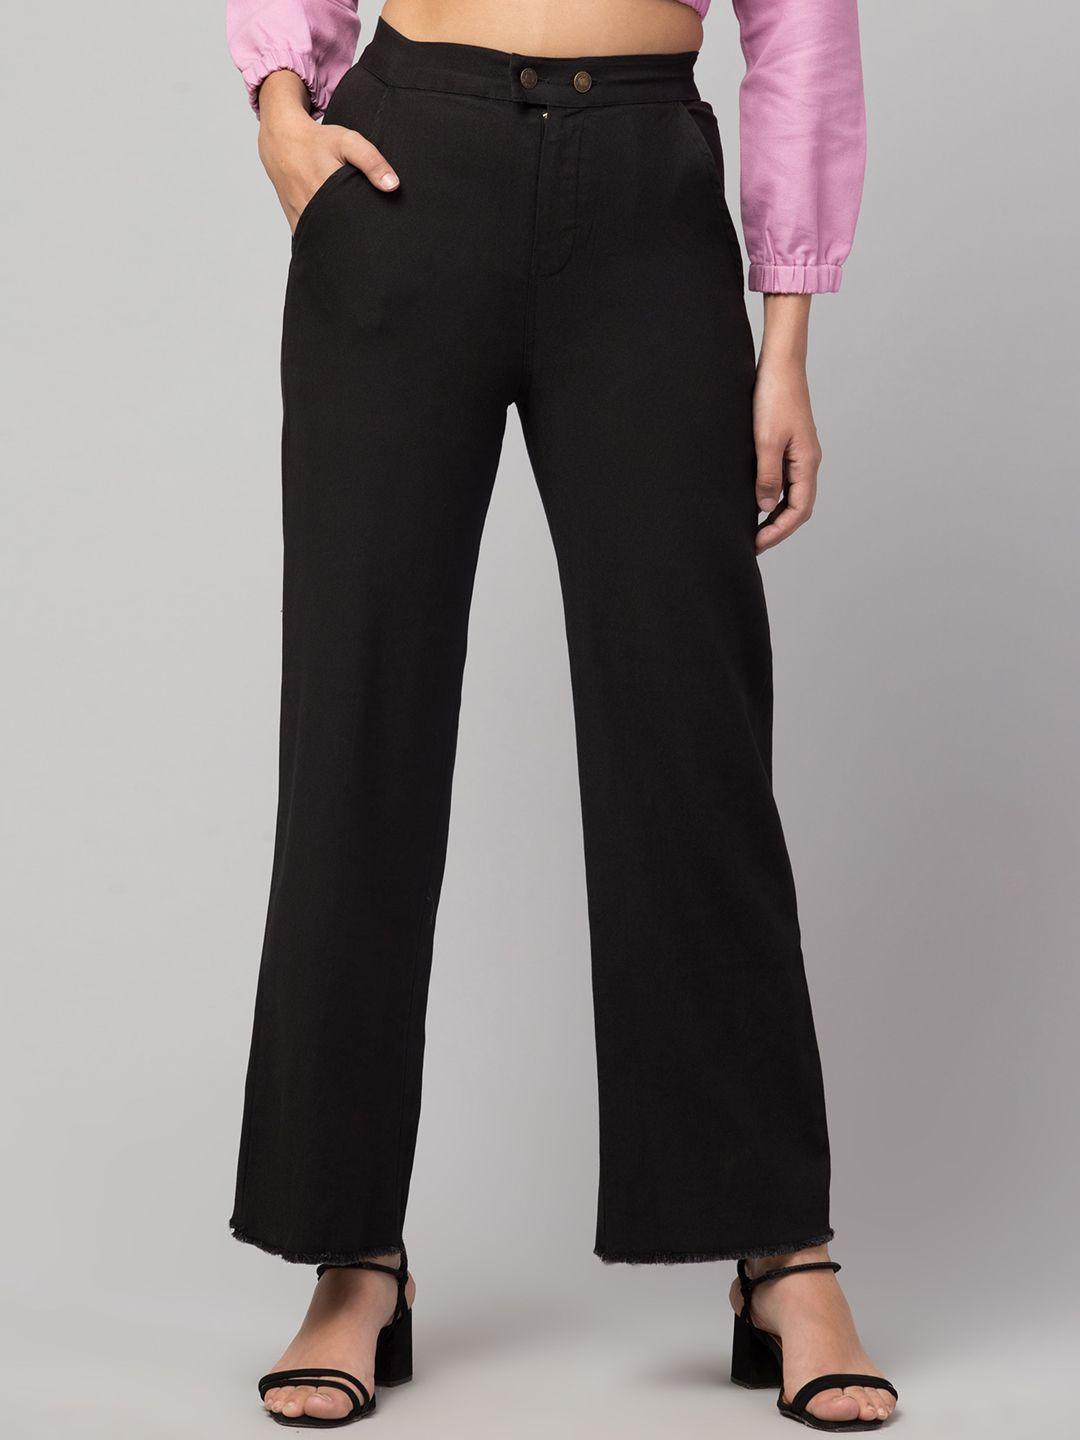 orchid hues women black high-rise double button jeans